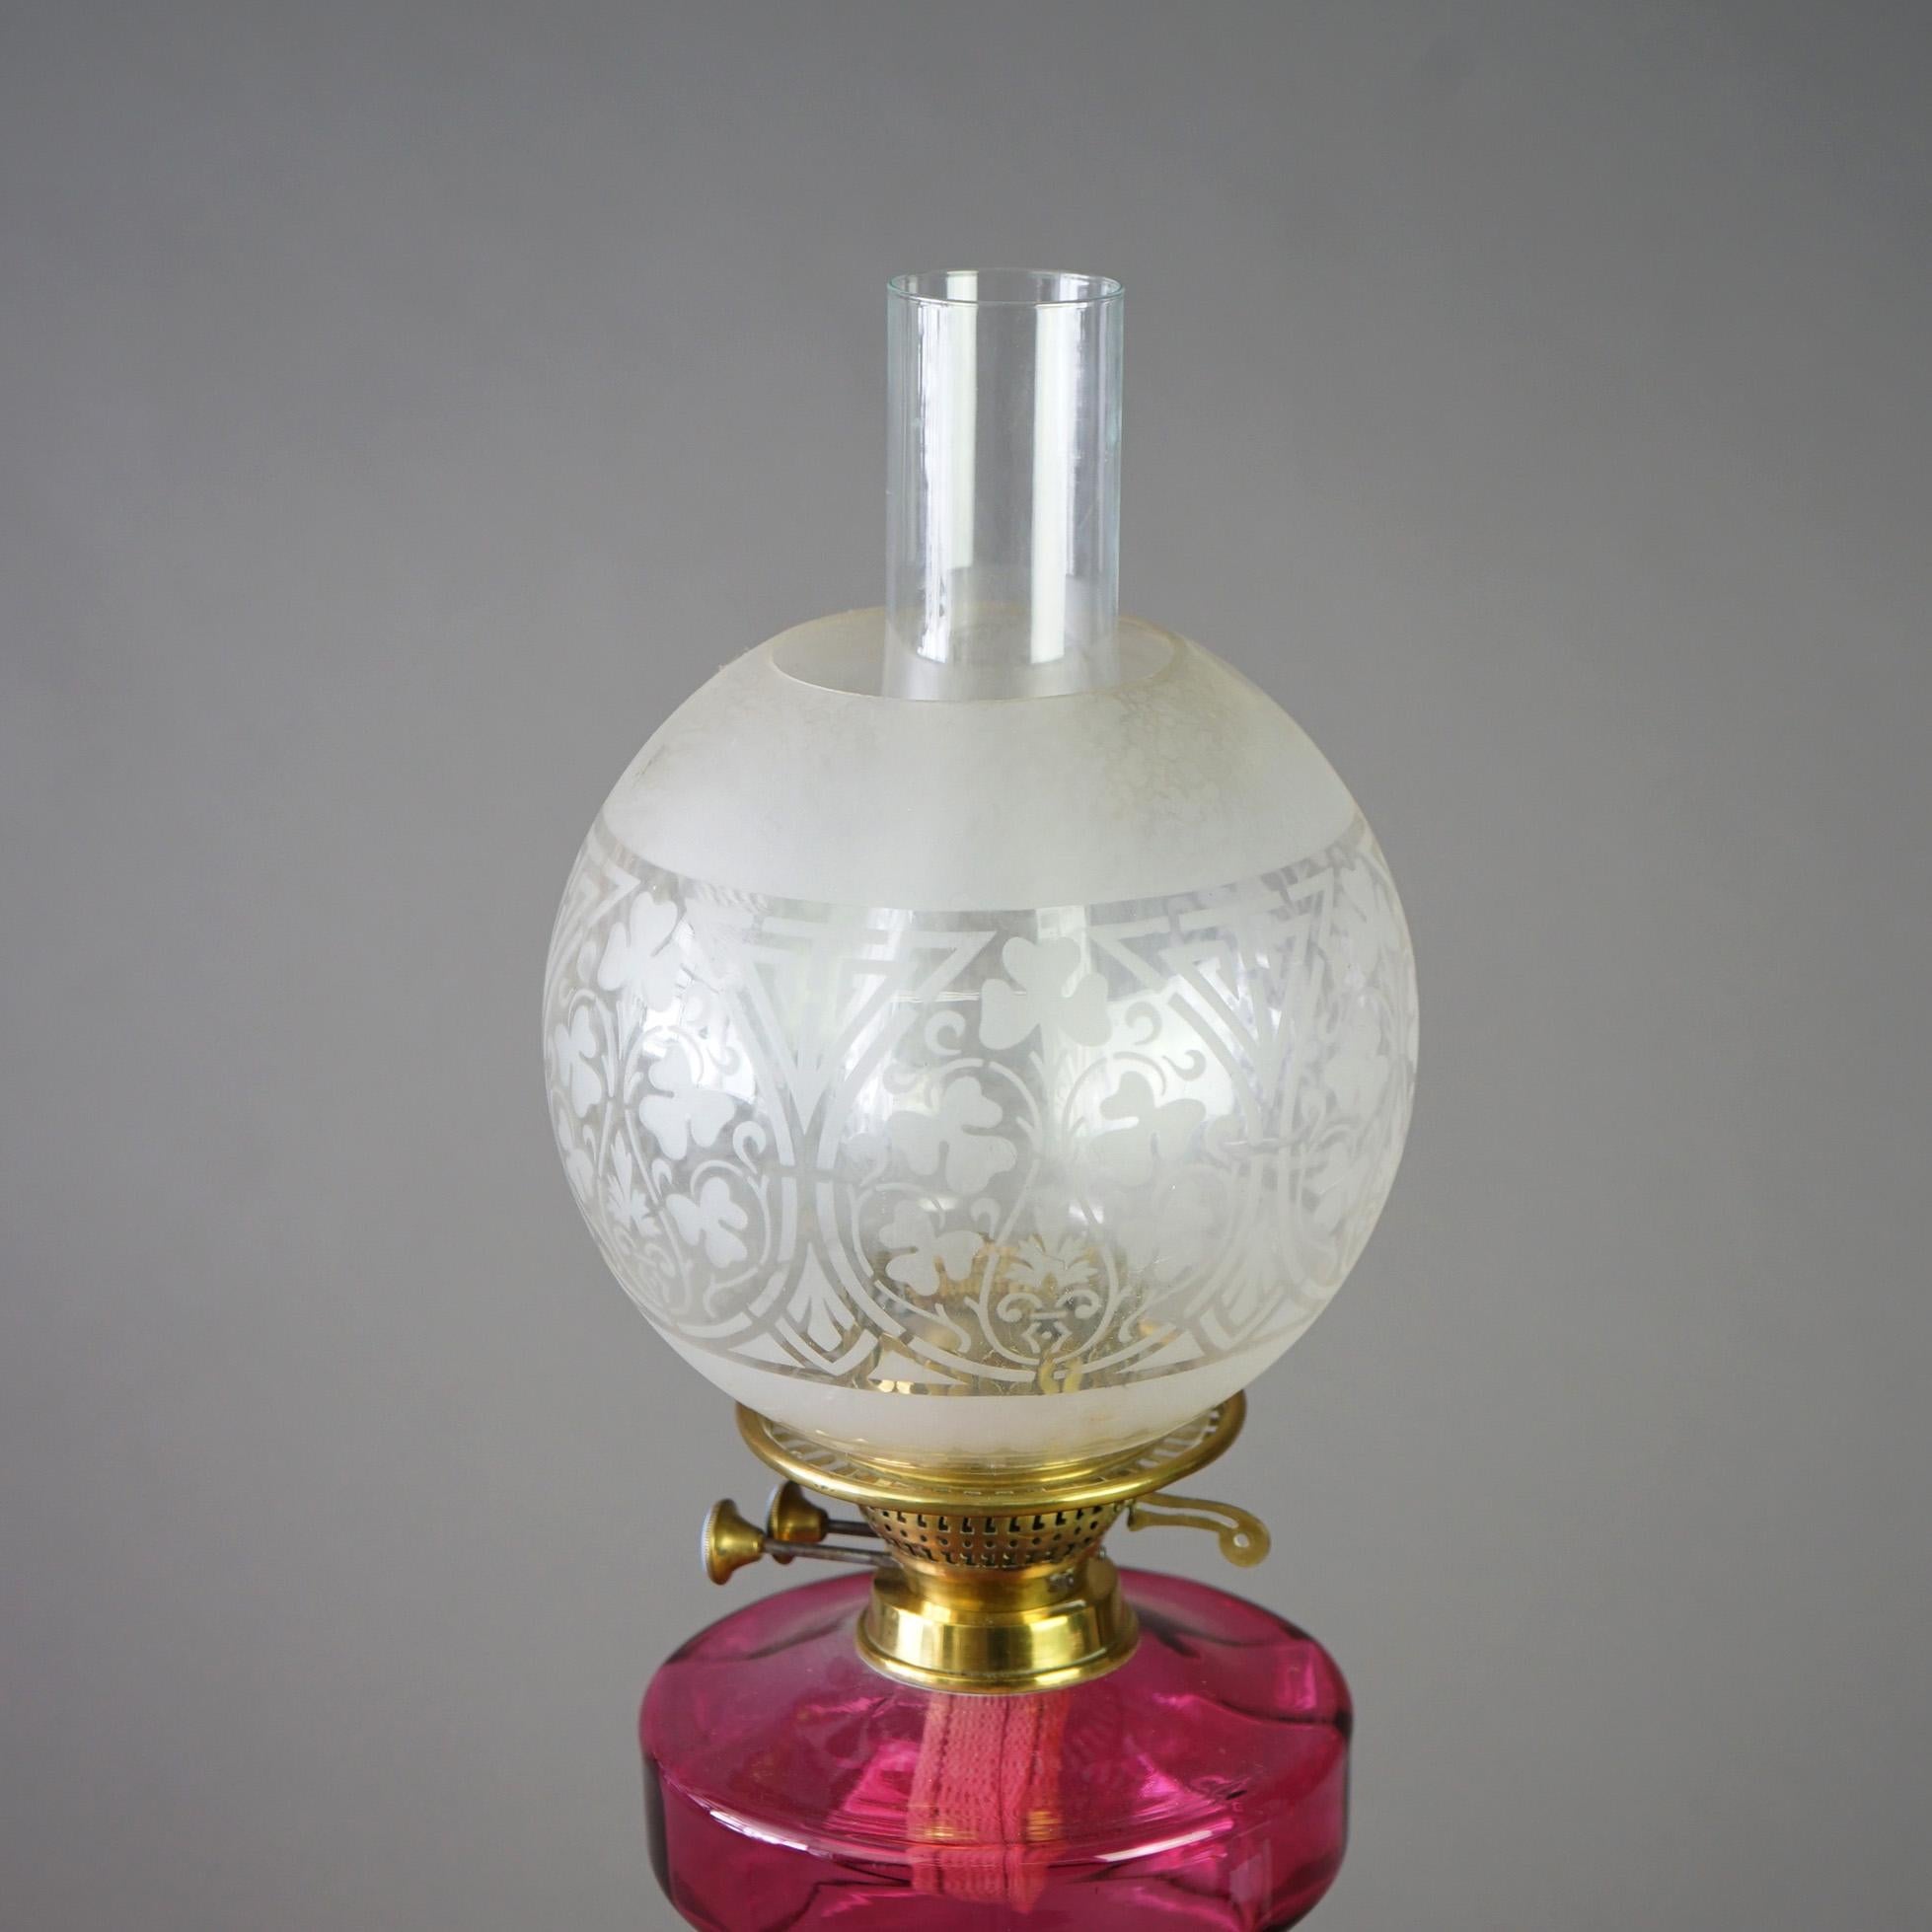 Antique Brass &Cranberry Glass “Gone With The Wind” Oil Lamp C1890 For Sale 1